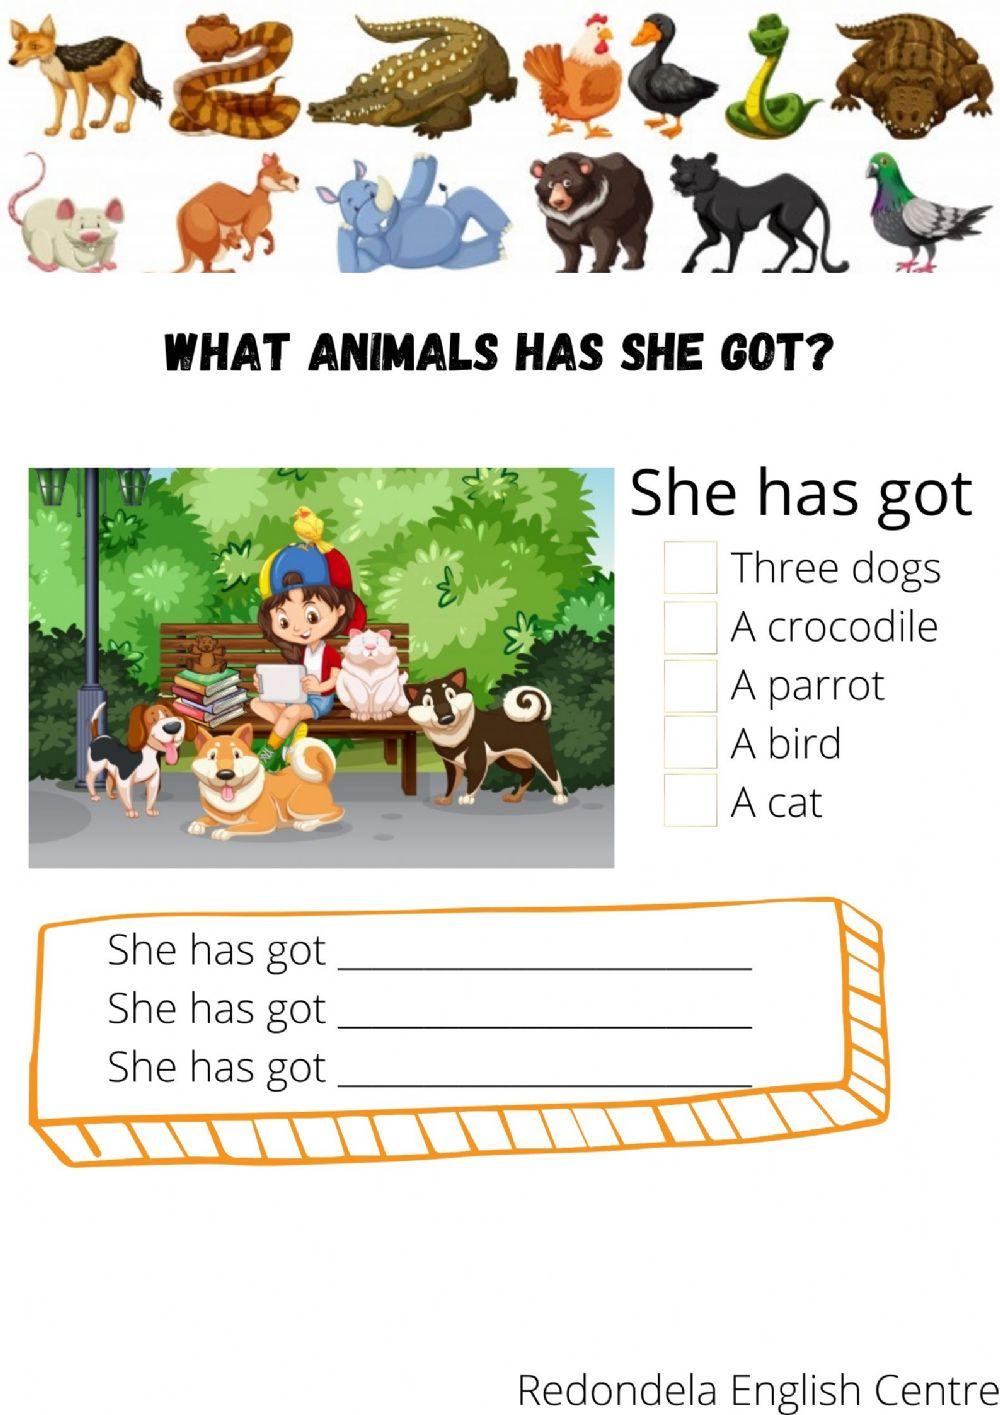 What animals has she got?